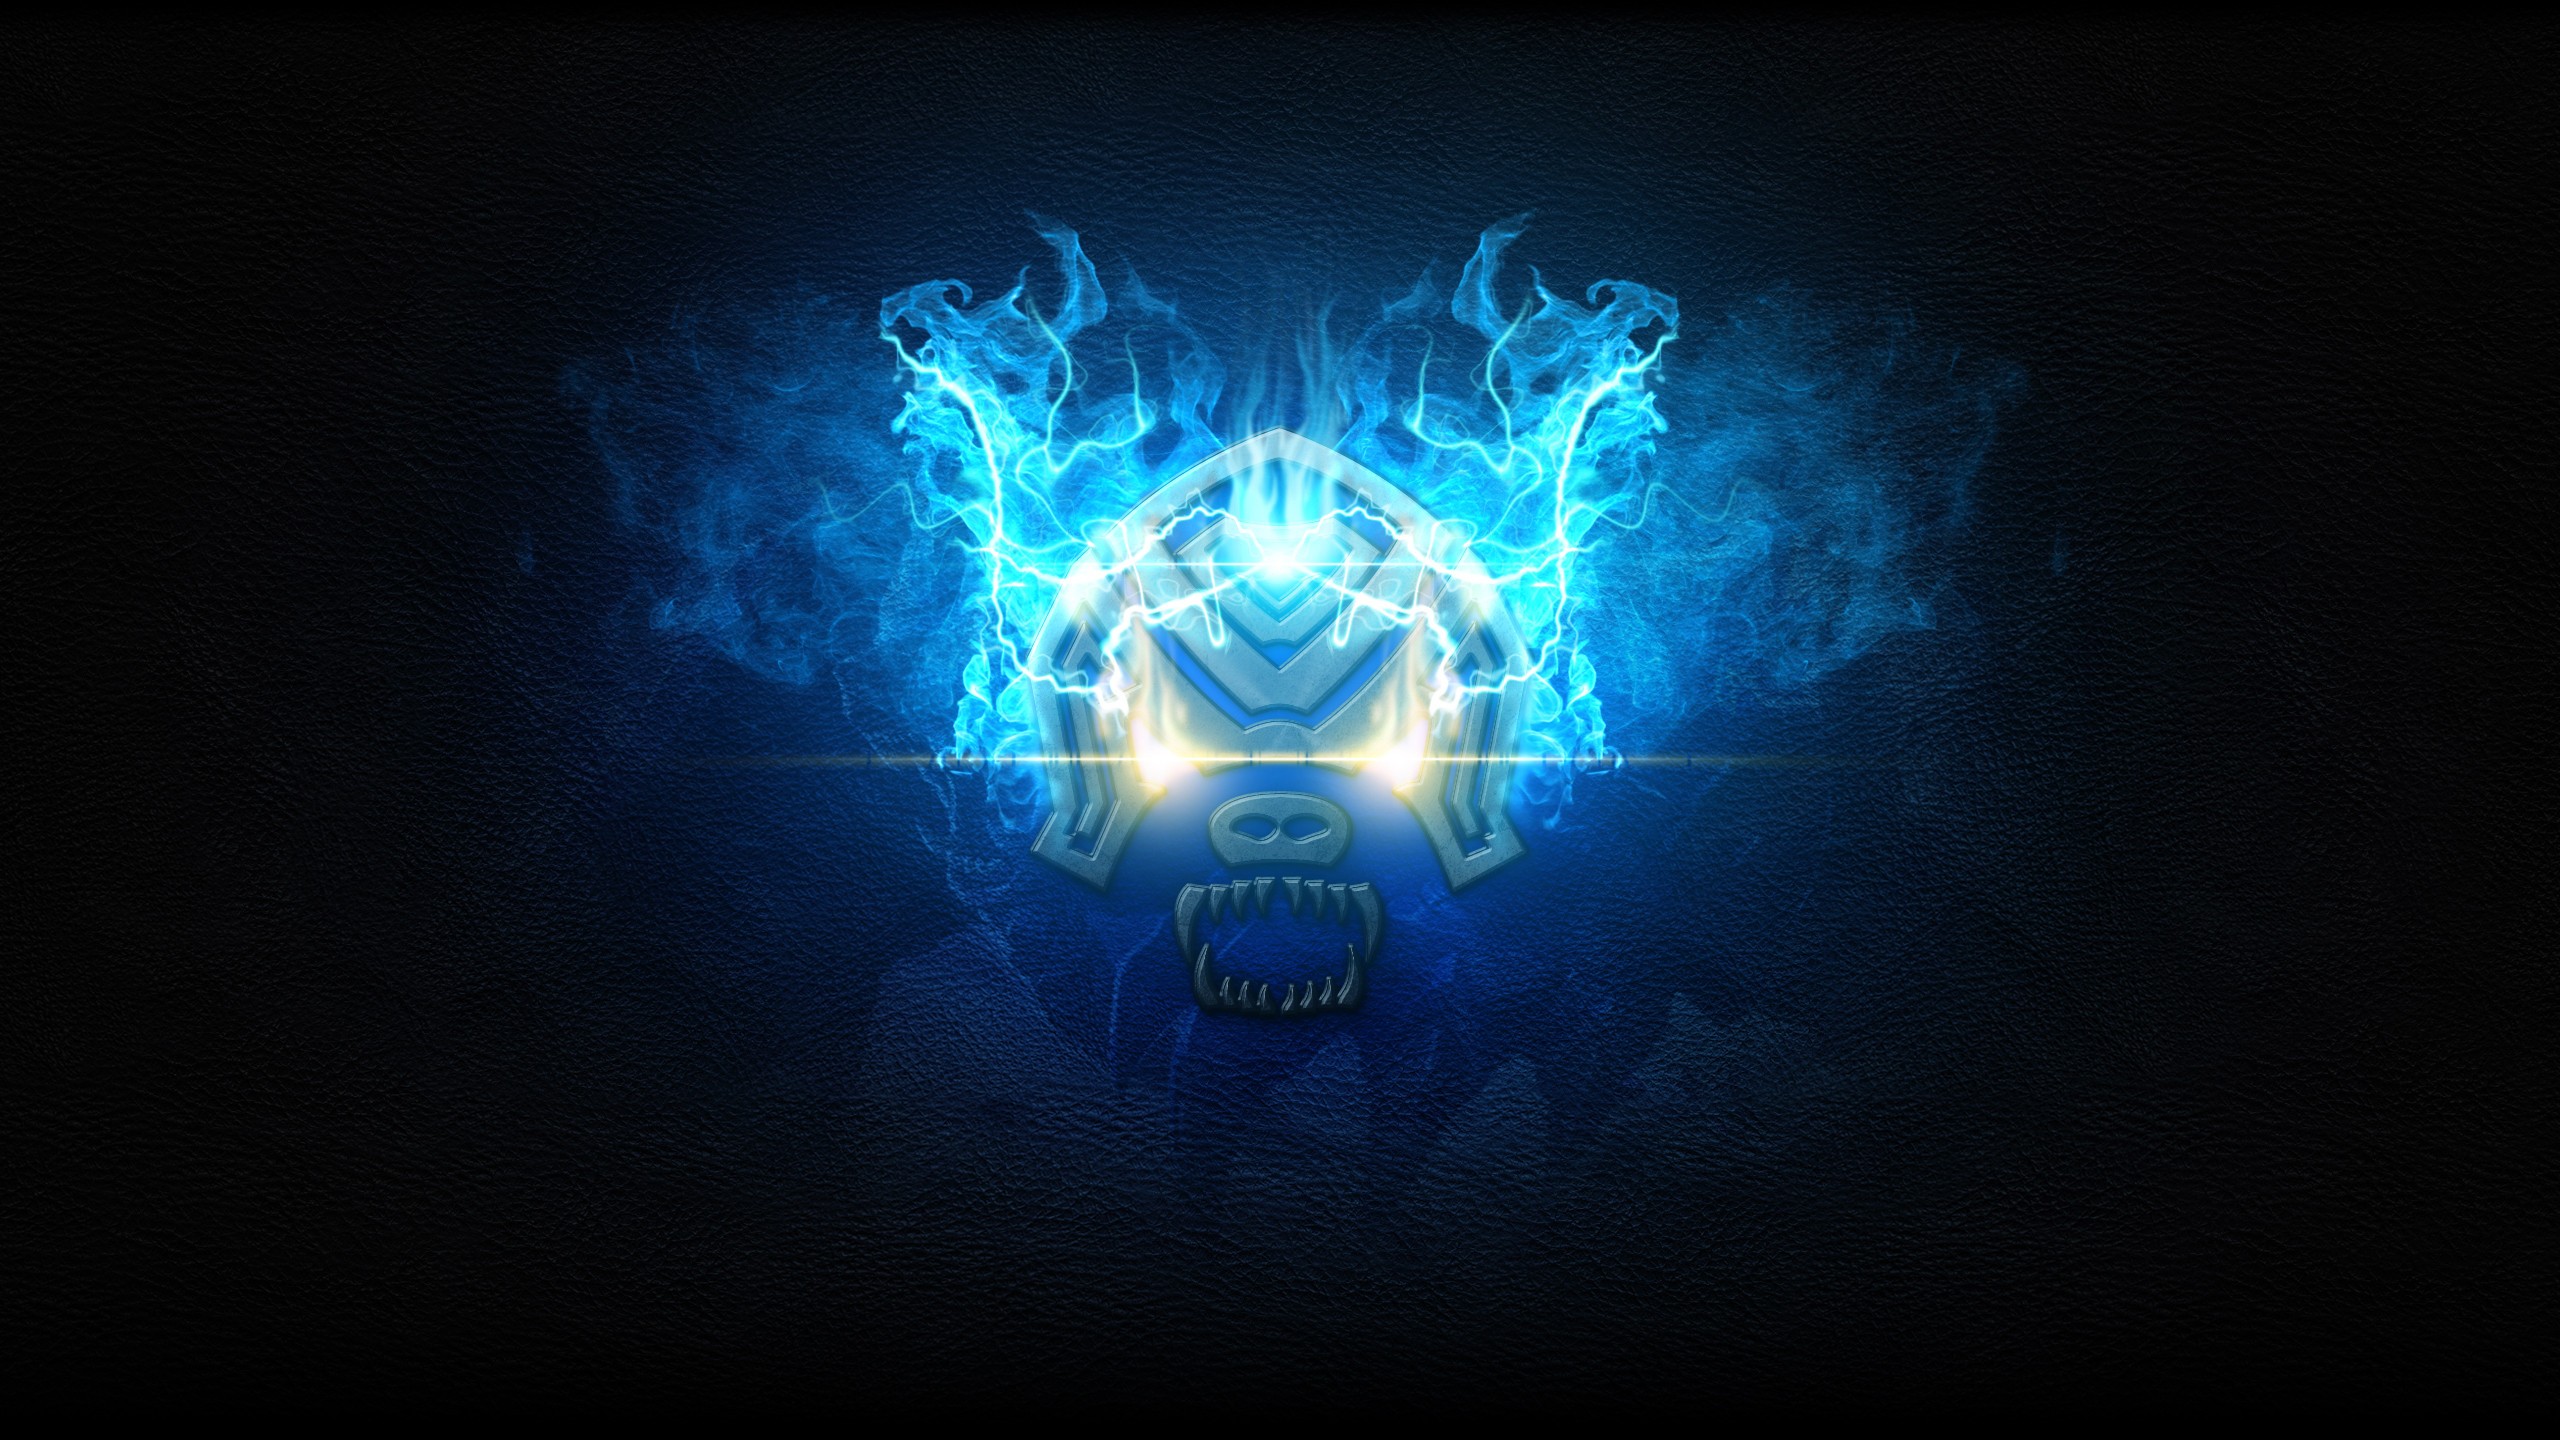 General 2560x1440 League of Legends Volibear cyan PC gaming digital art Riot Games glowing eyes blue flames fire simple background video games